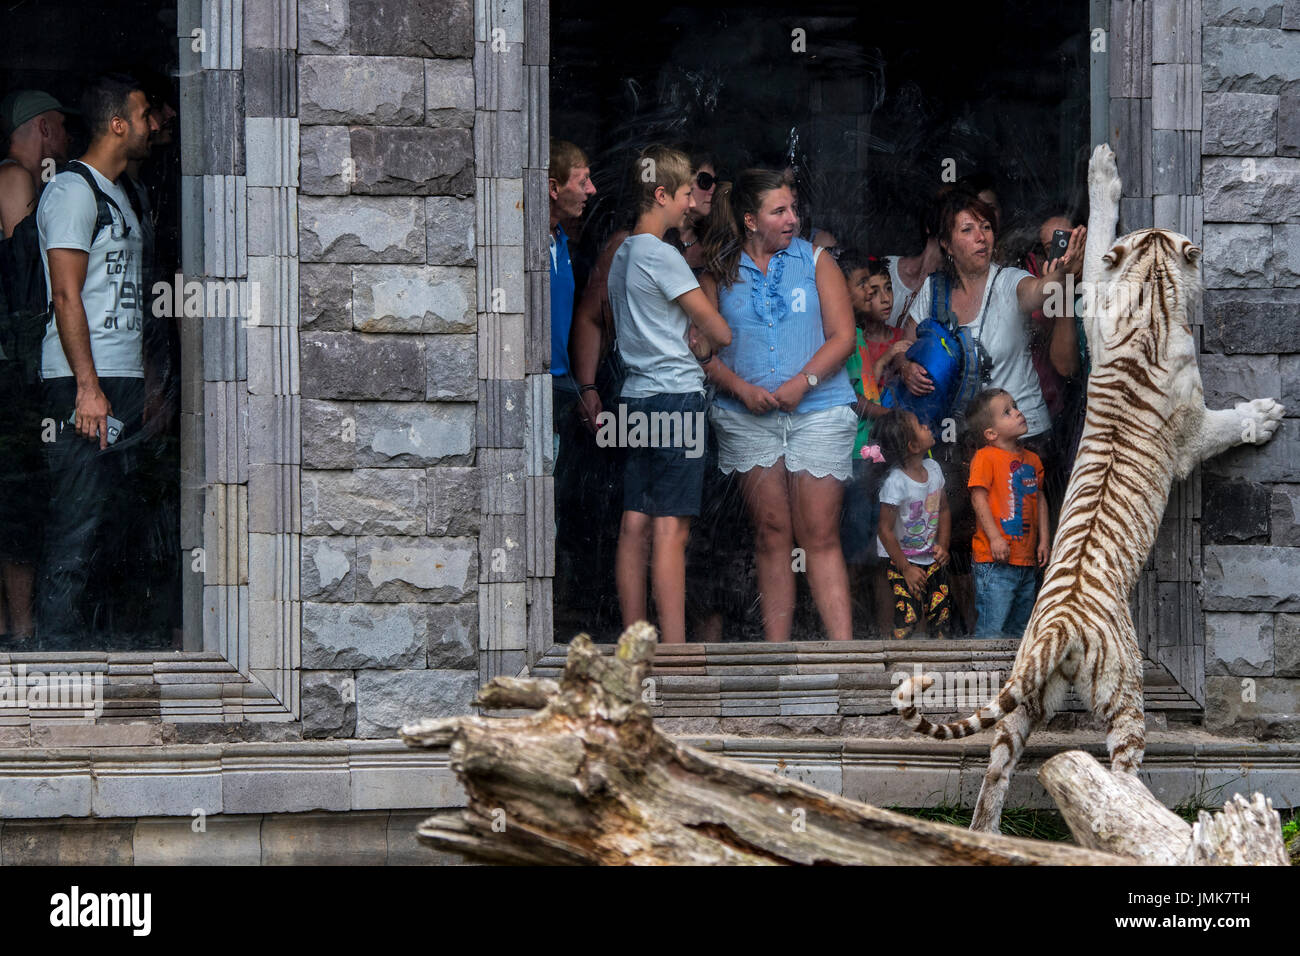 Visitors looking at captive white tiger / bleached tiger (Panthera tigris) behind glass pane in zoo Stock Photo